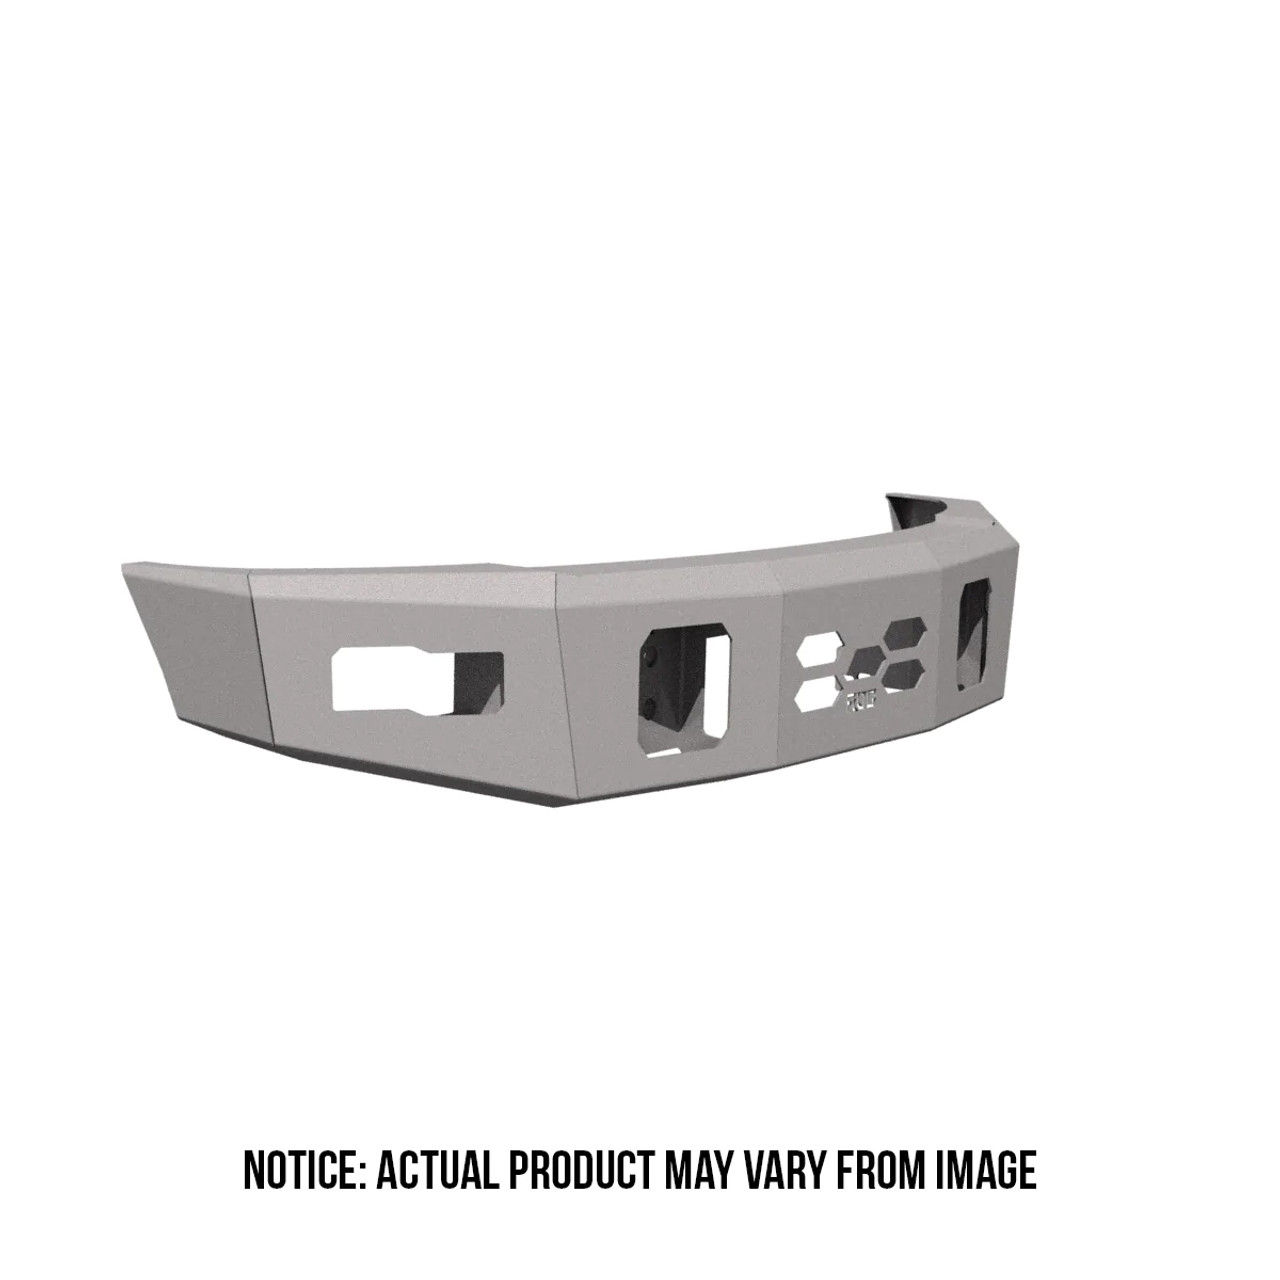 Flog WD Series Front Bumper - 2017-2019 Ford (F450-F550) 6.7L Powerstroke - Angle View